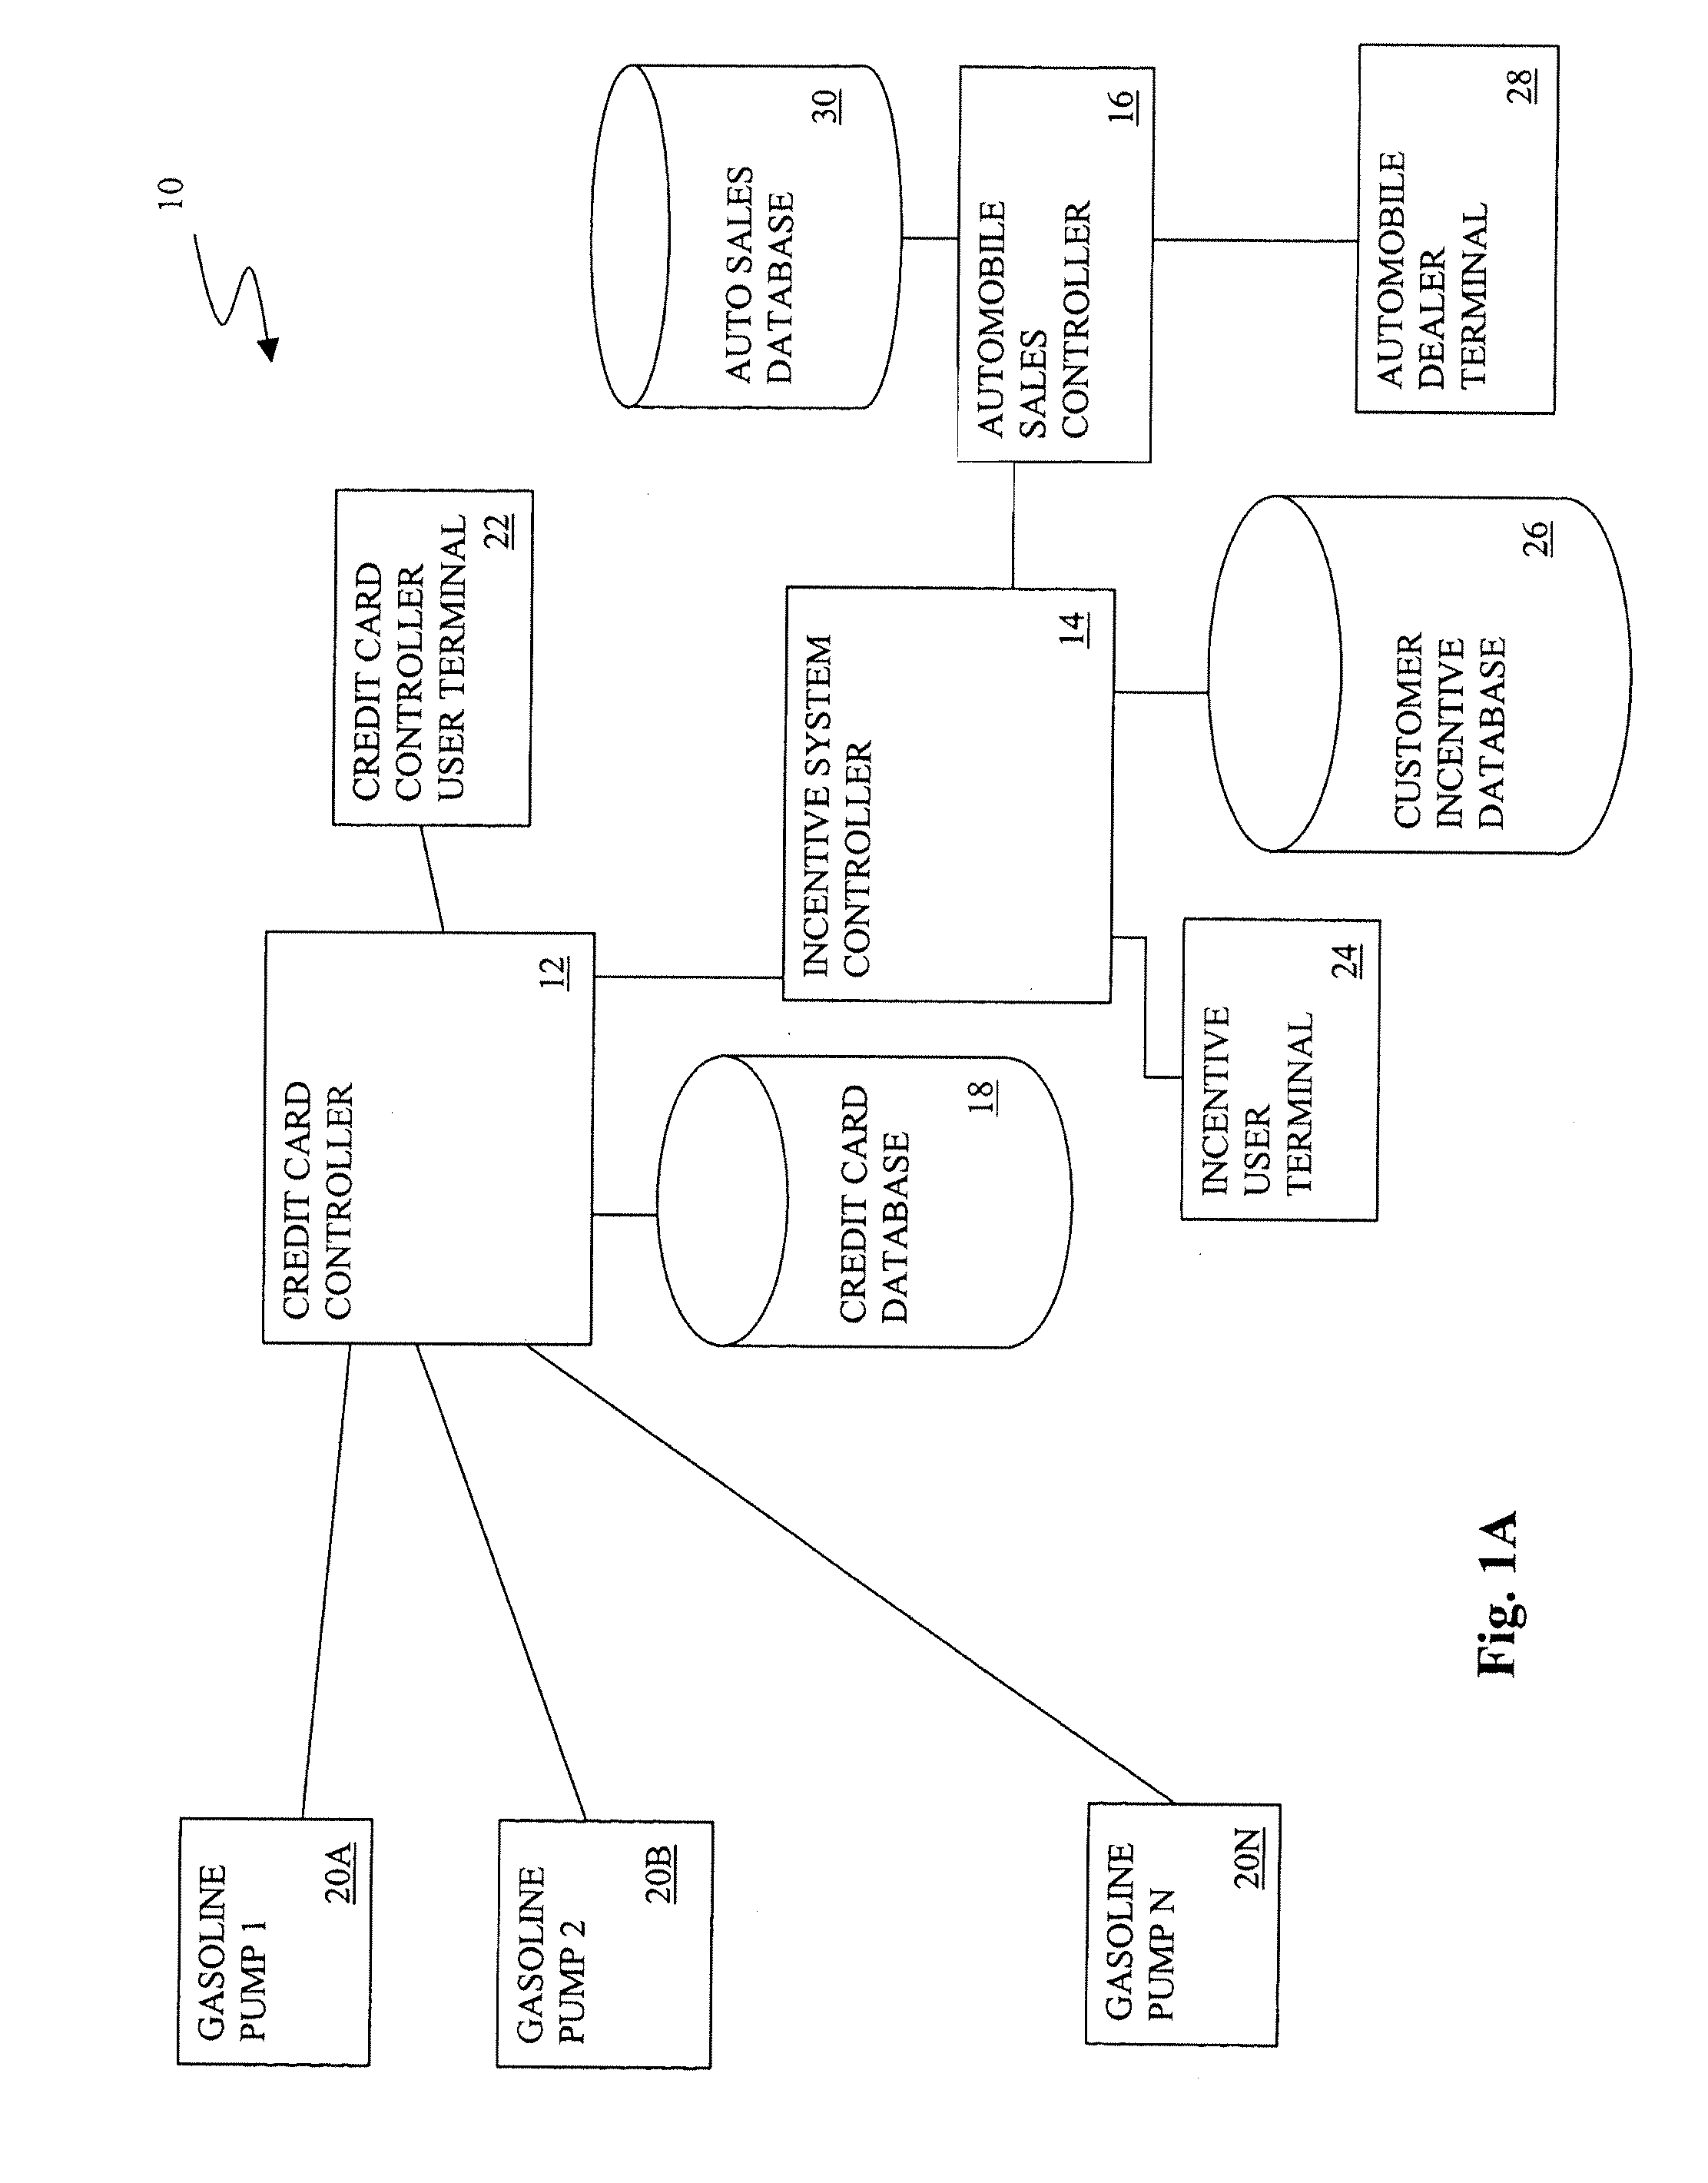 System and method for providing a fuel purchase incentive with the sale of a vehicle